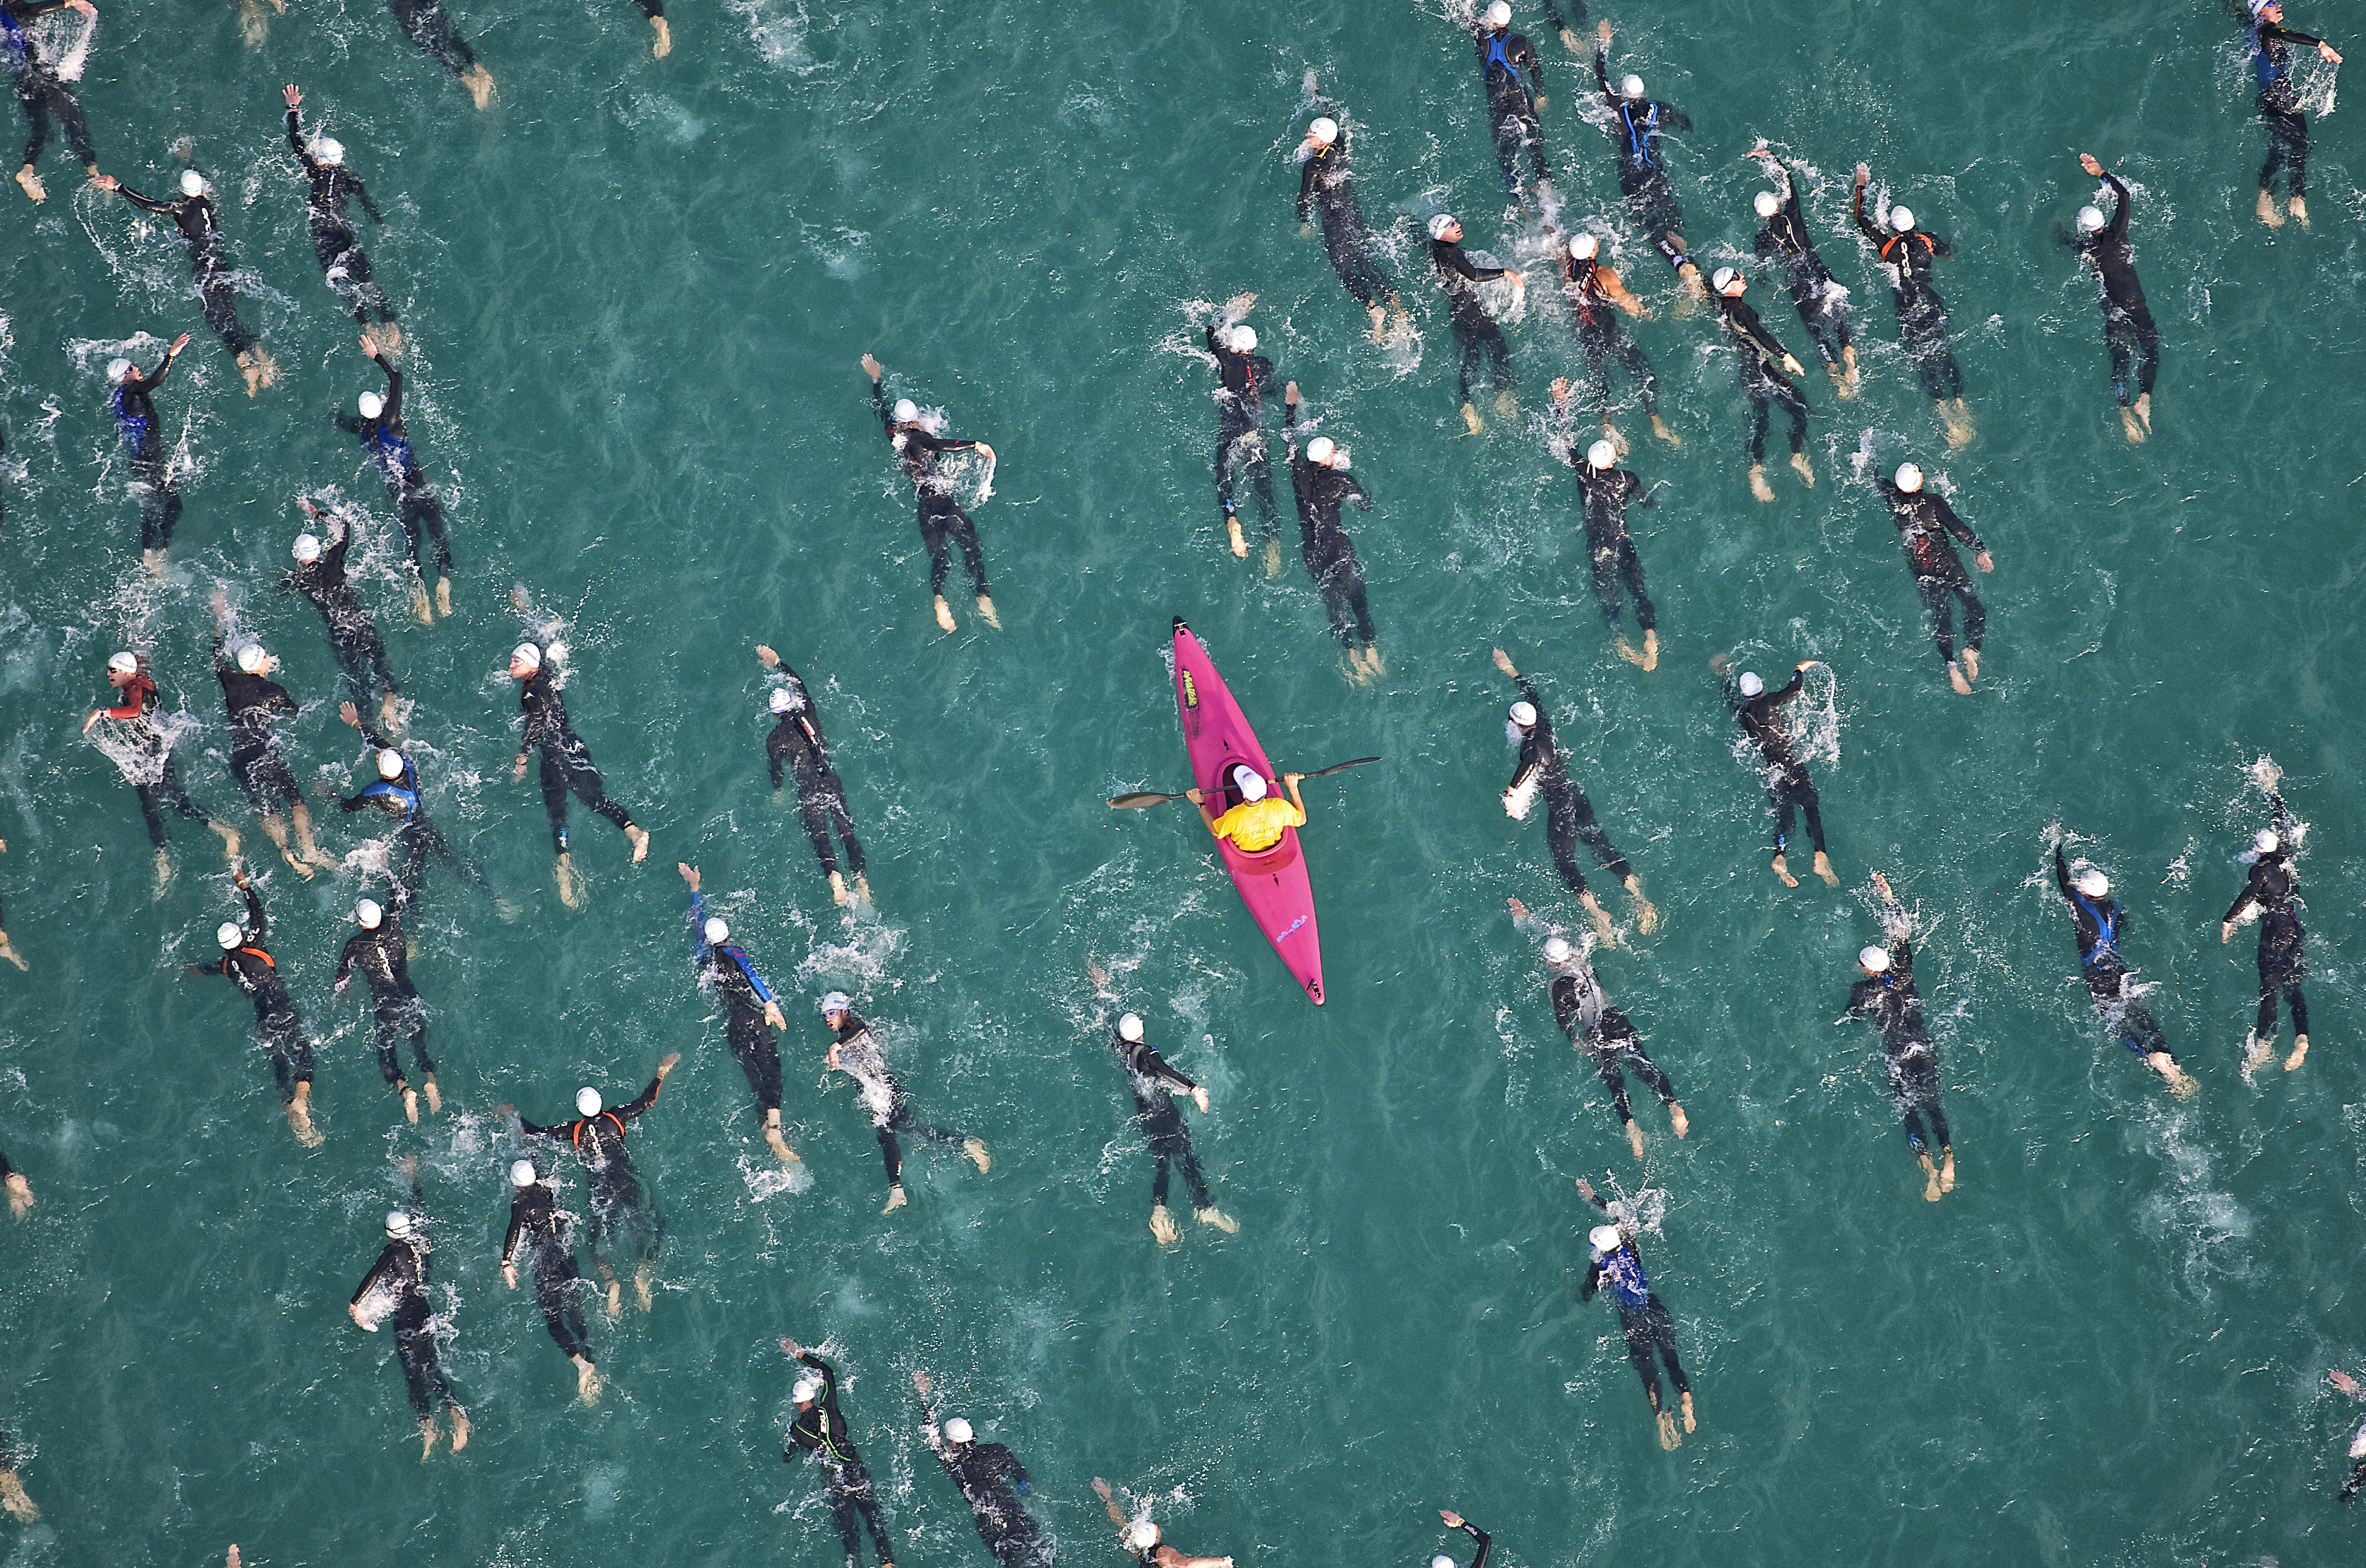 A kayaker in the ocean amongst a group of open water swimmers